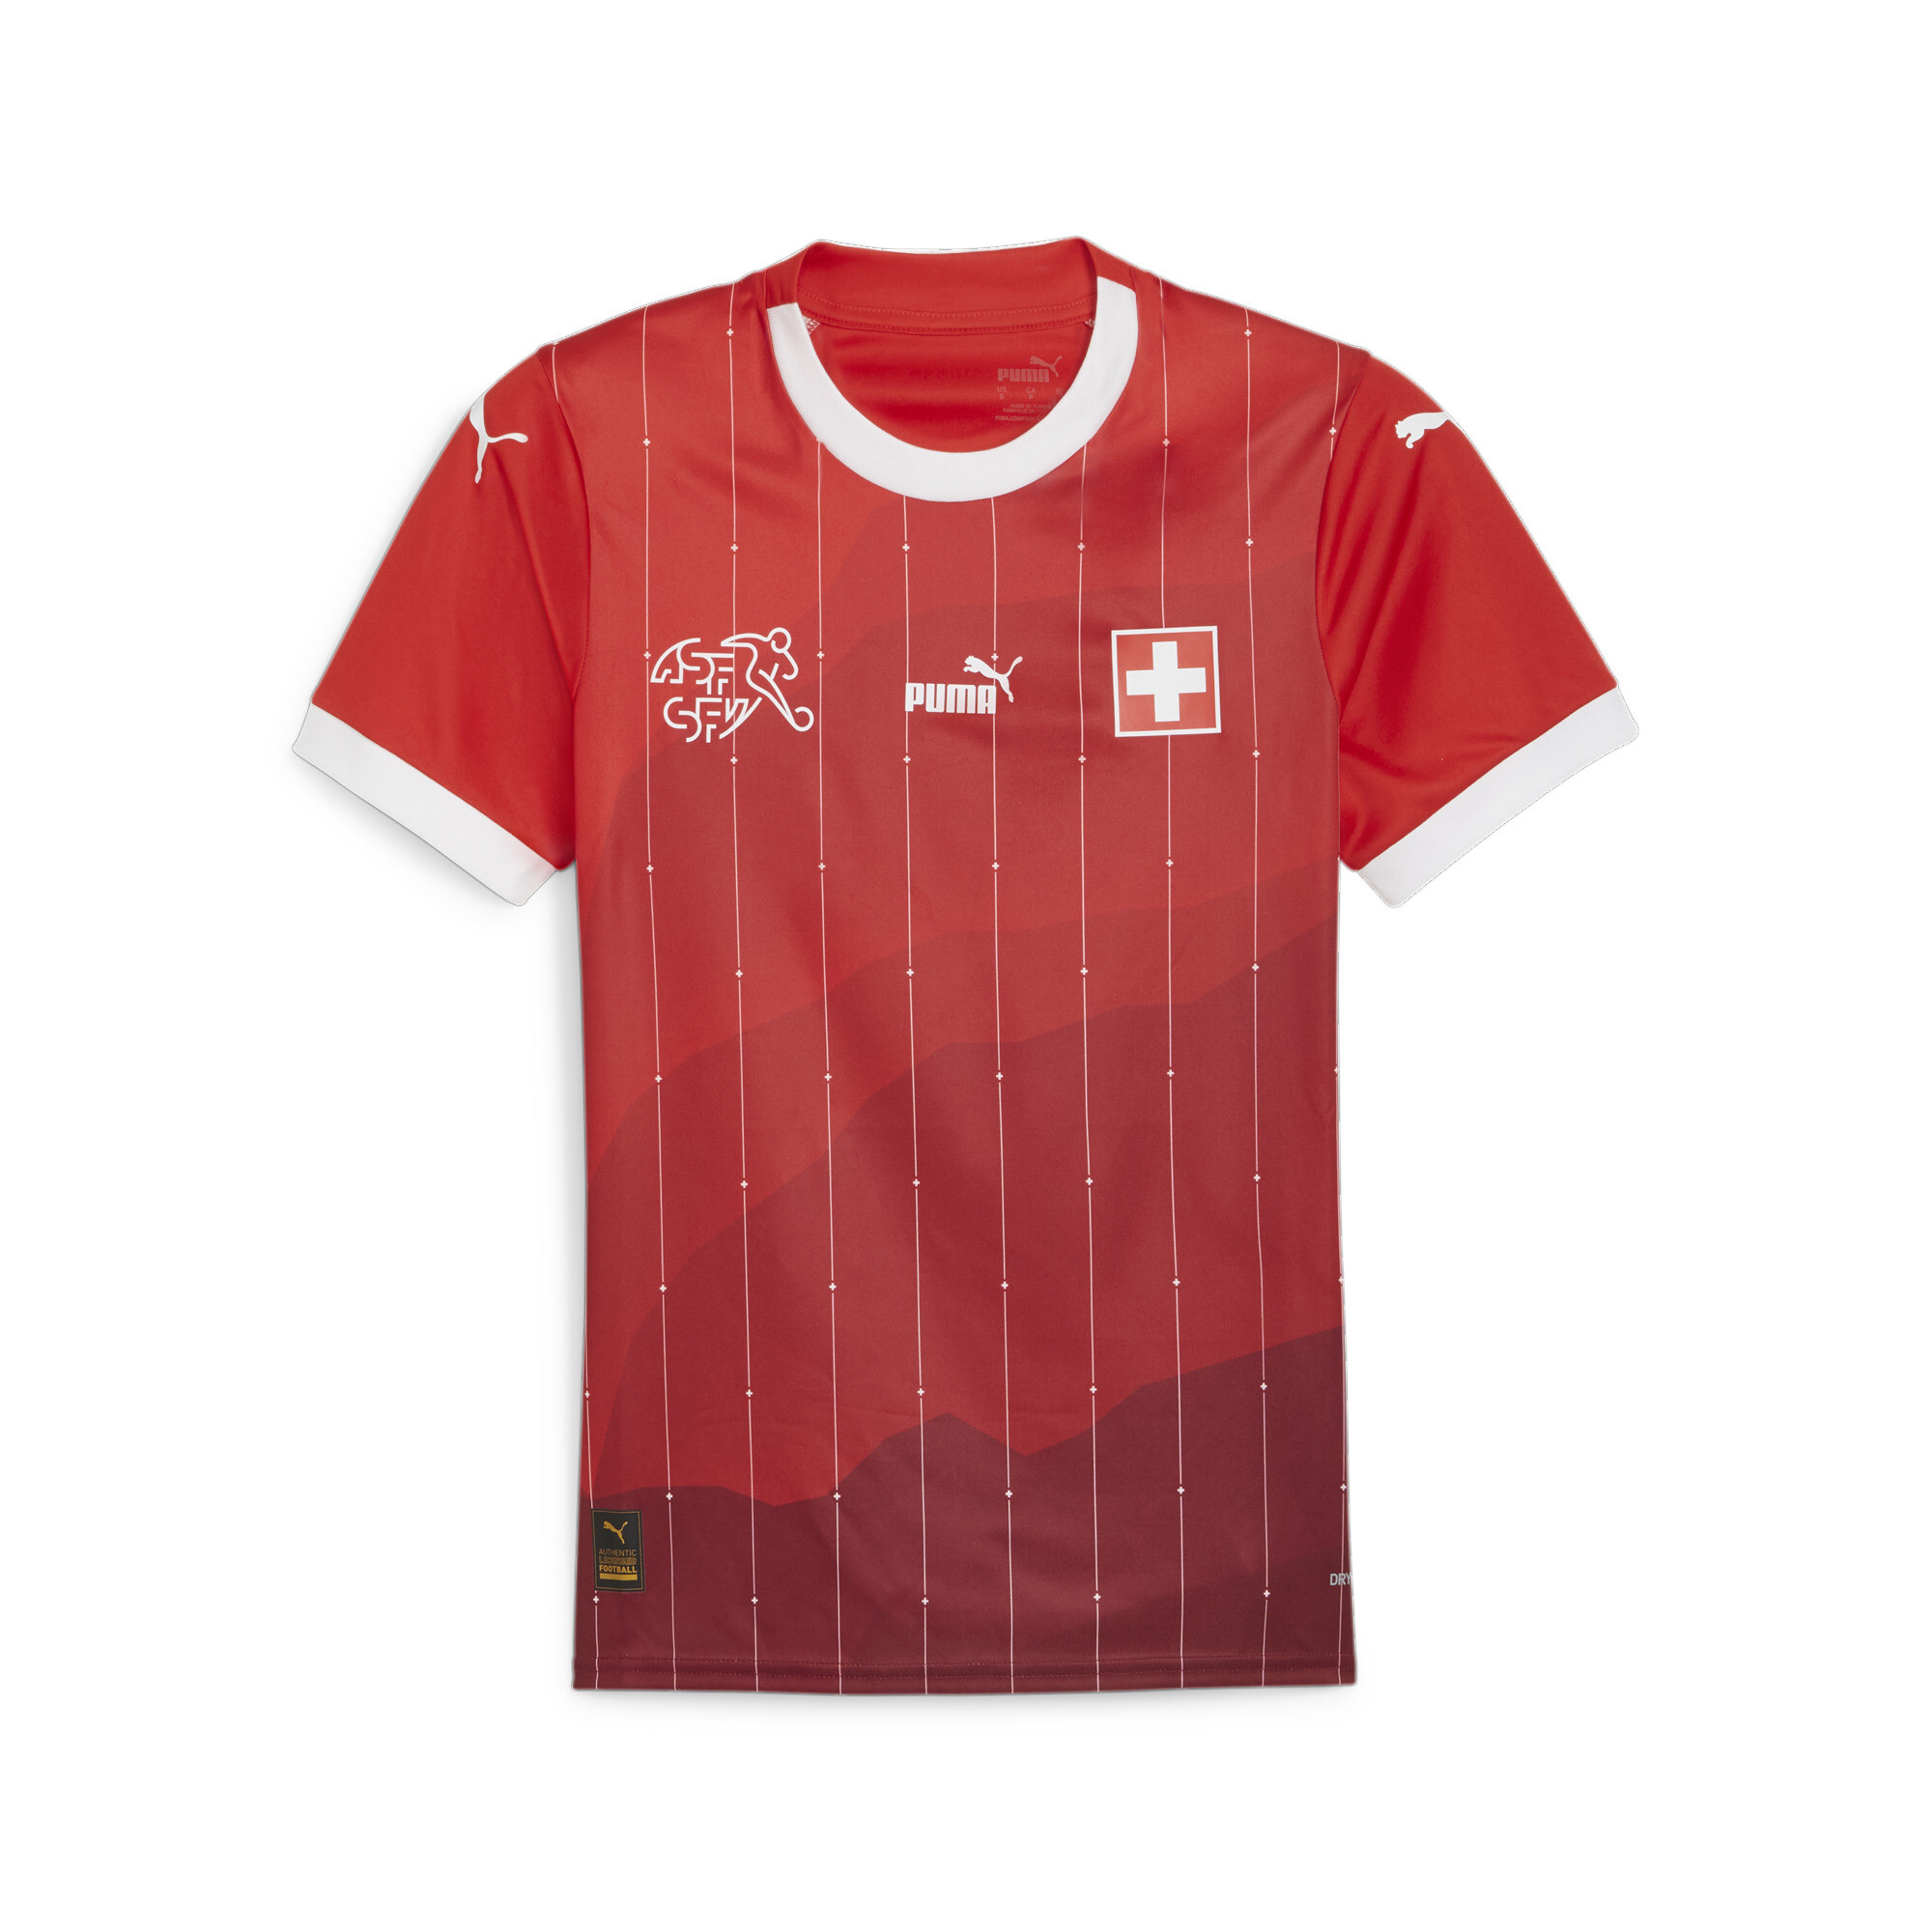 Women's PUMA Switzerland 23/24 World Cup Home Jersey In Red, Size XS